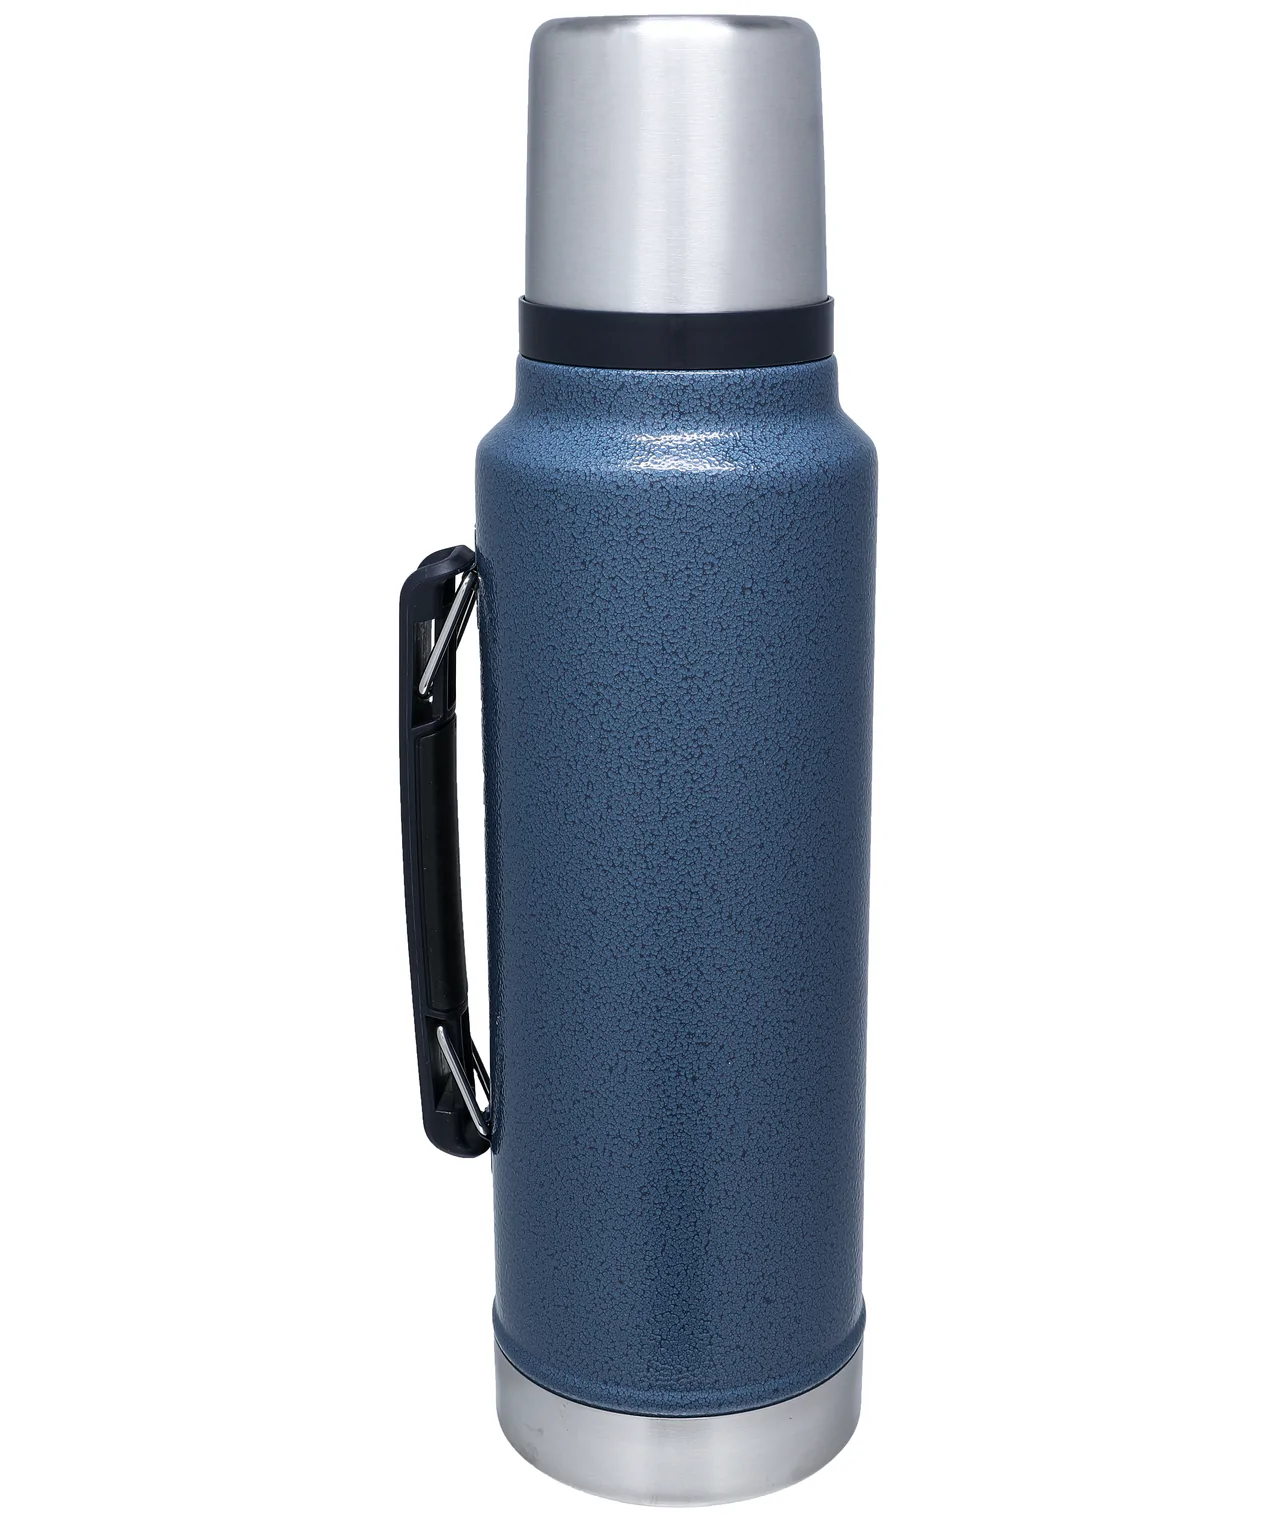 Promotional Stanley® 1.5 qt Classic Vacuum Insulated Bottle